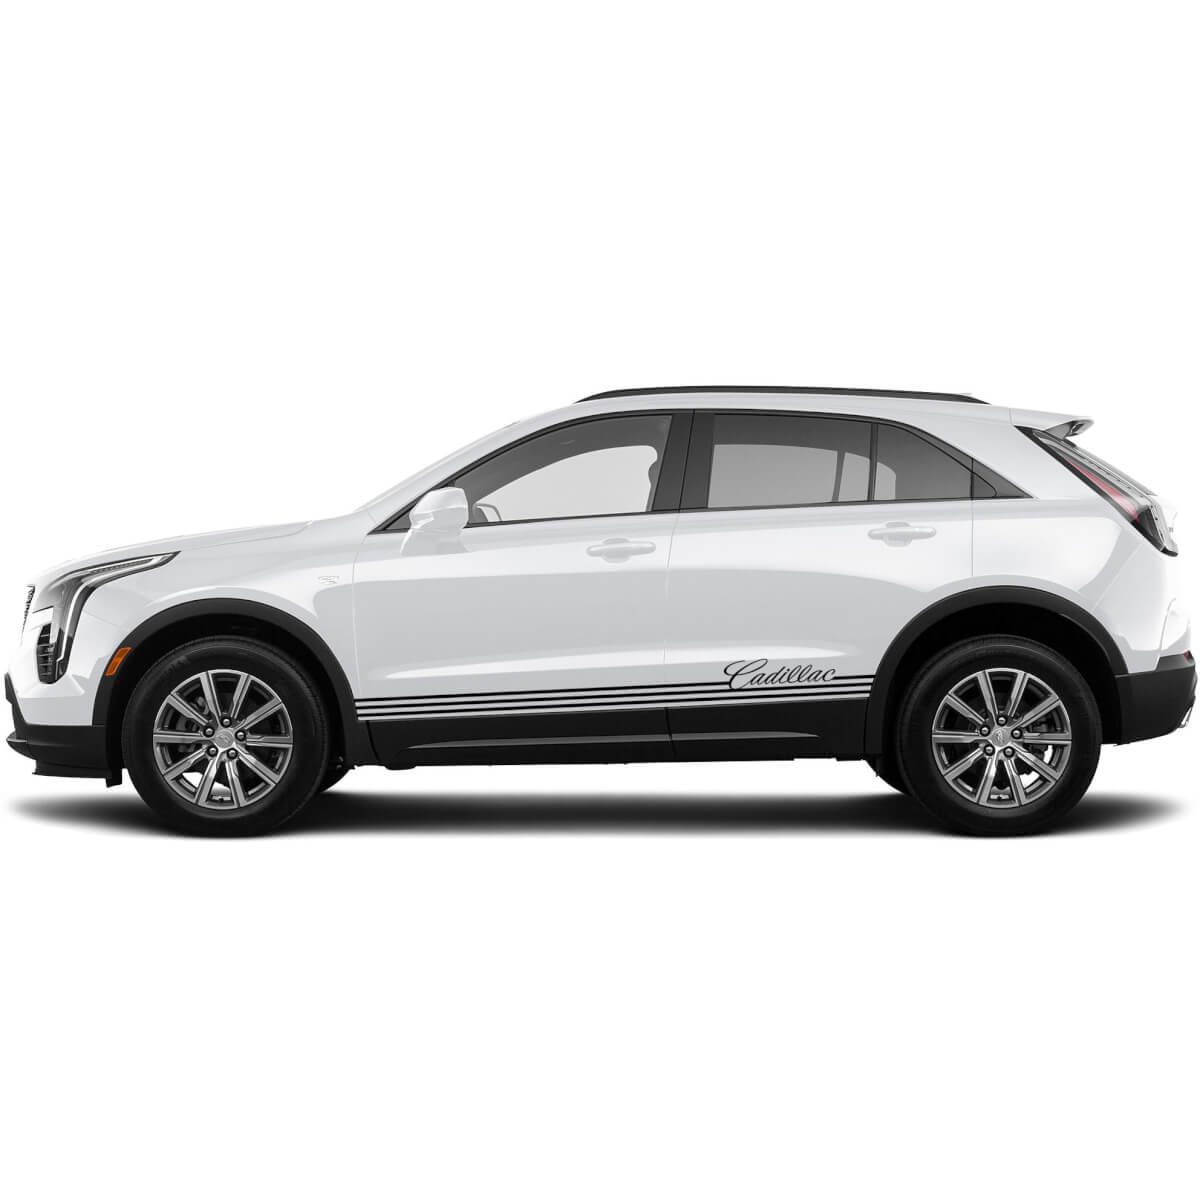 New Decal Rocker Panel Sticker Lines Stripe for Cadillac XT4 - new